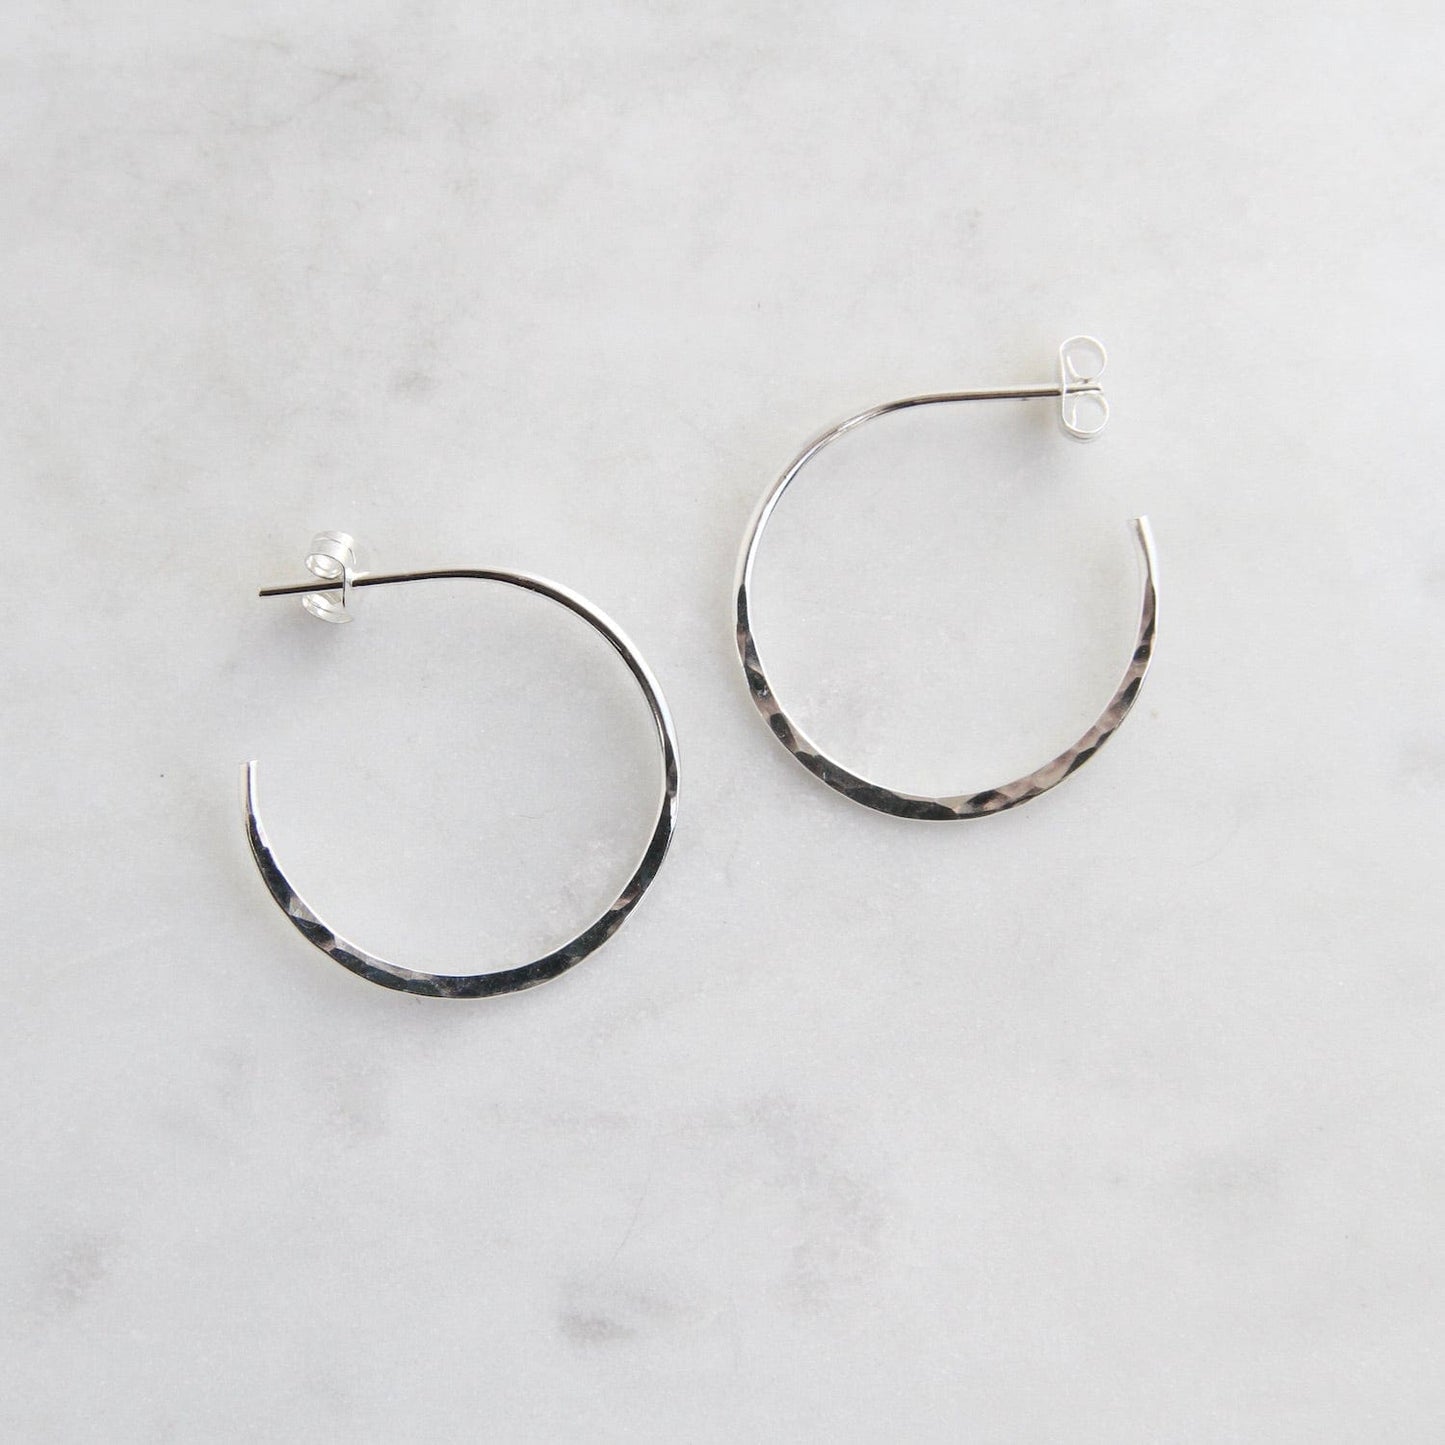 EAR Thin 25mm Sterling Silver Hammered Hoop